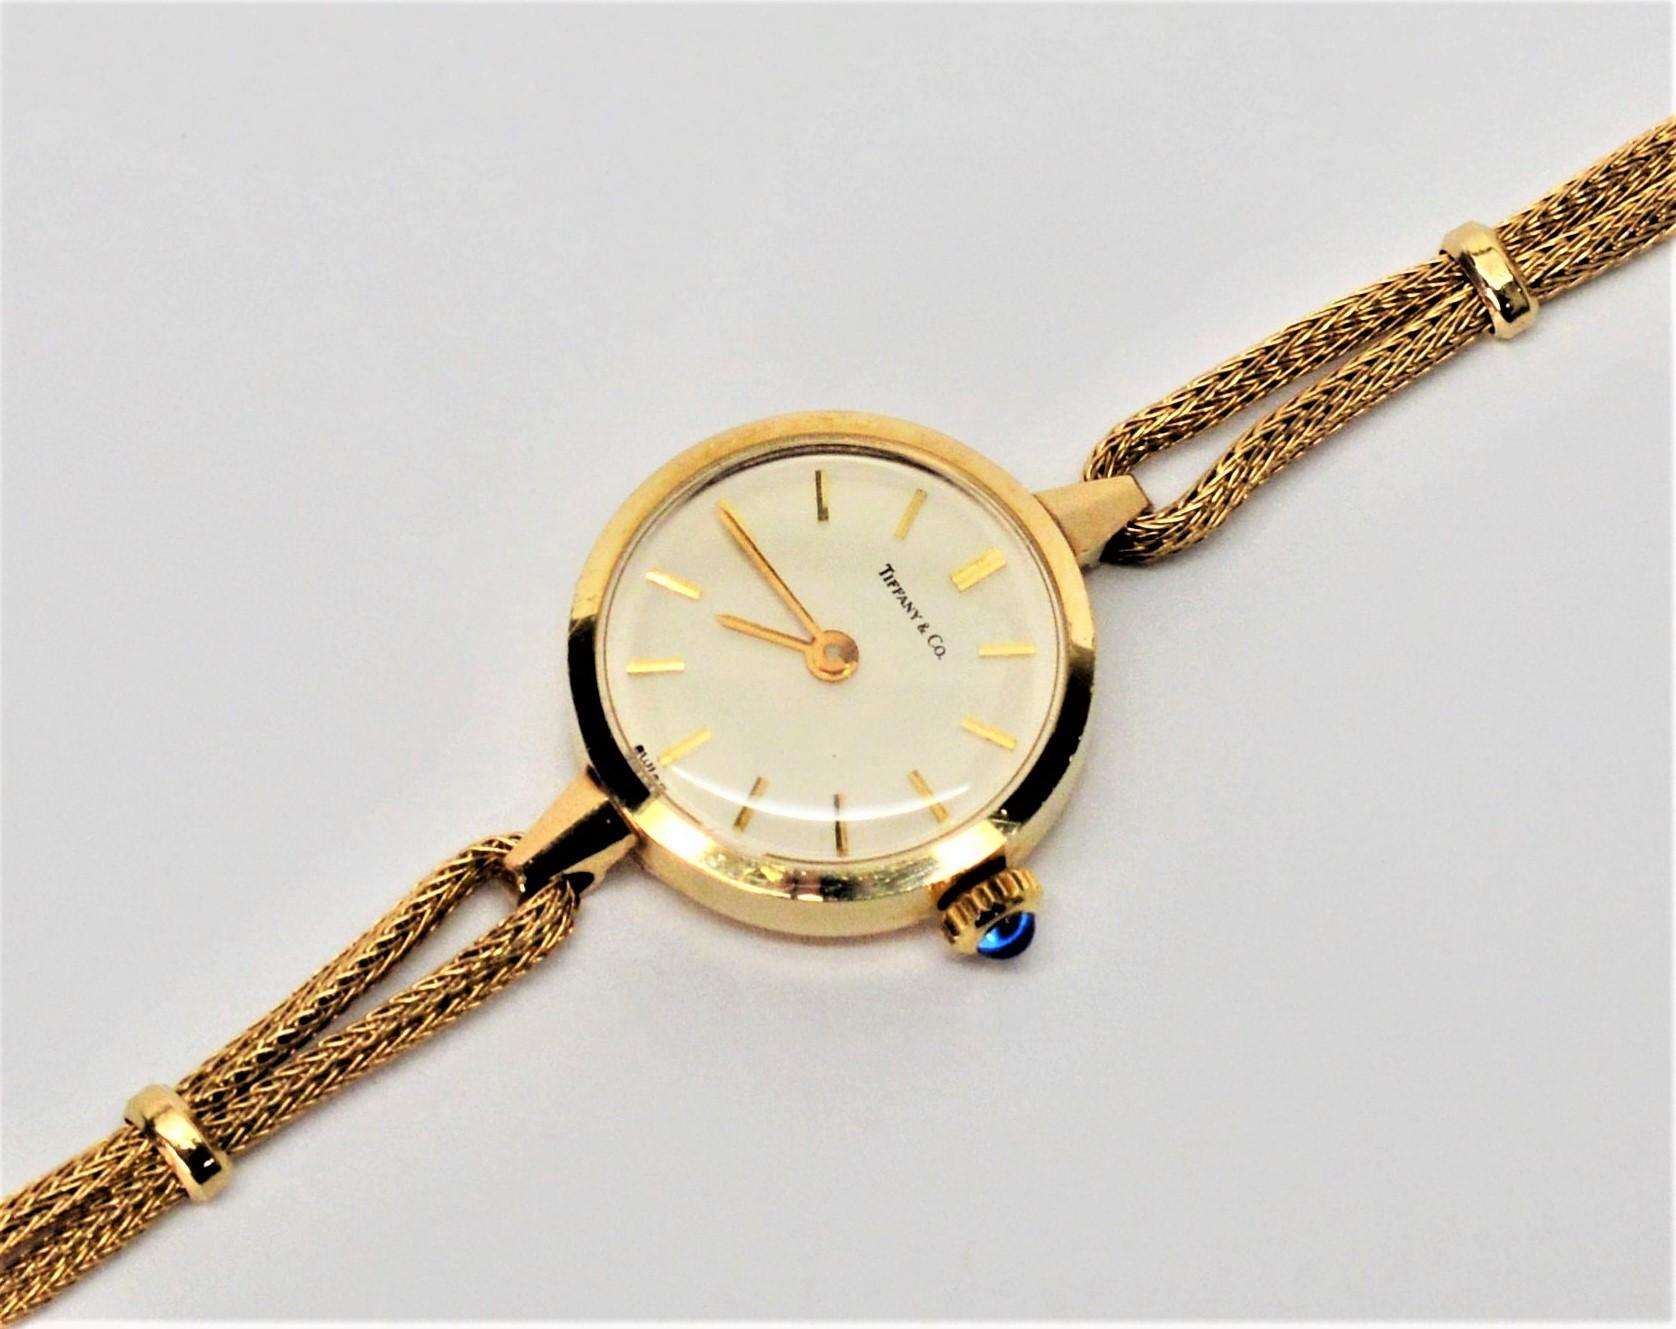 Elegant simplicity describes this Tiffany & Co. Ladies 14K fourteen karat yellow gold dress wrist watch. Measures 3/4 inch round with a white face, signed by Tiffany & Co. and gold stick markers. The case back has an engraved personalized message